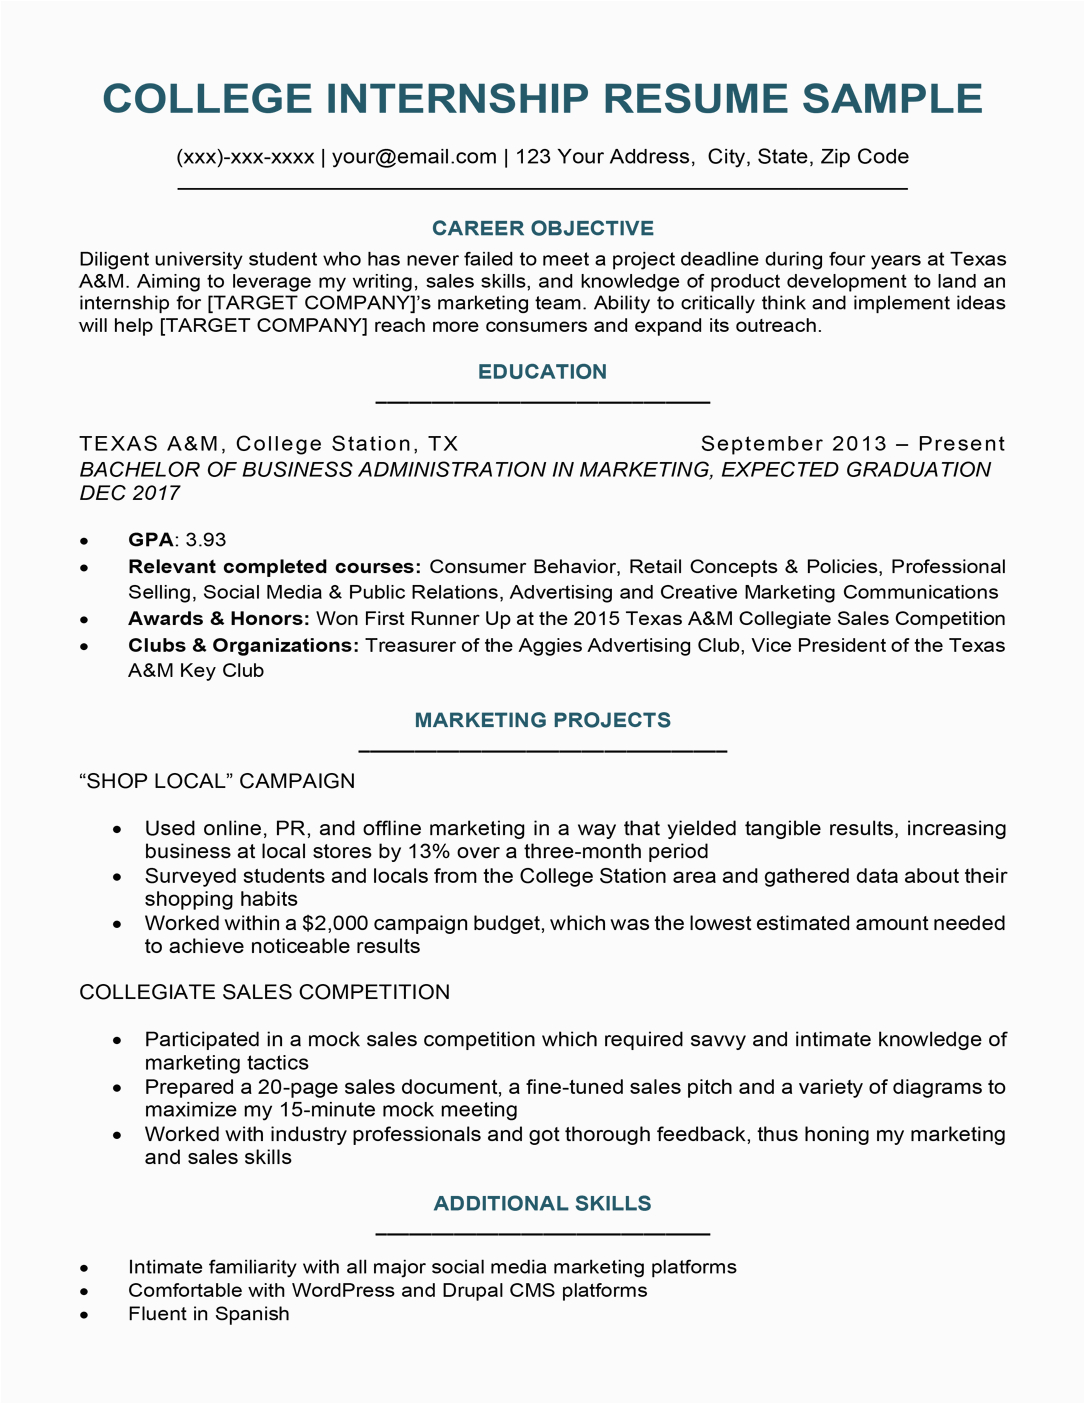 Sample Objective for College Student Resume College Student Resume Sample & Writing Tips